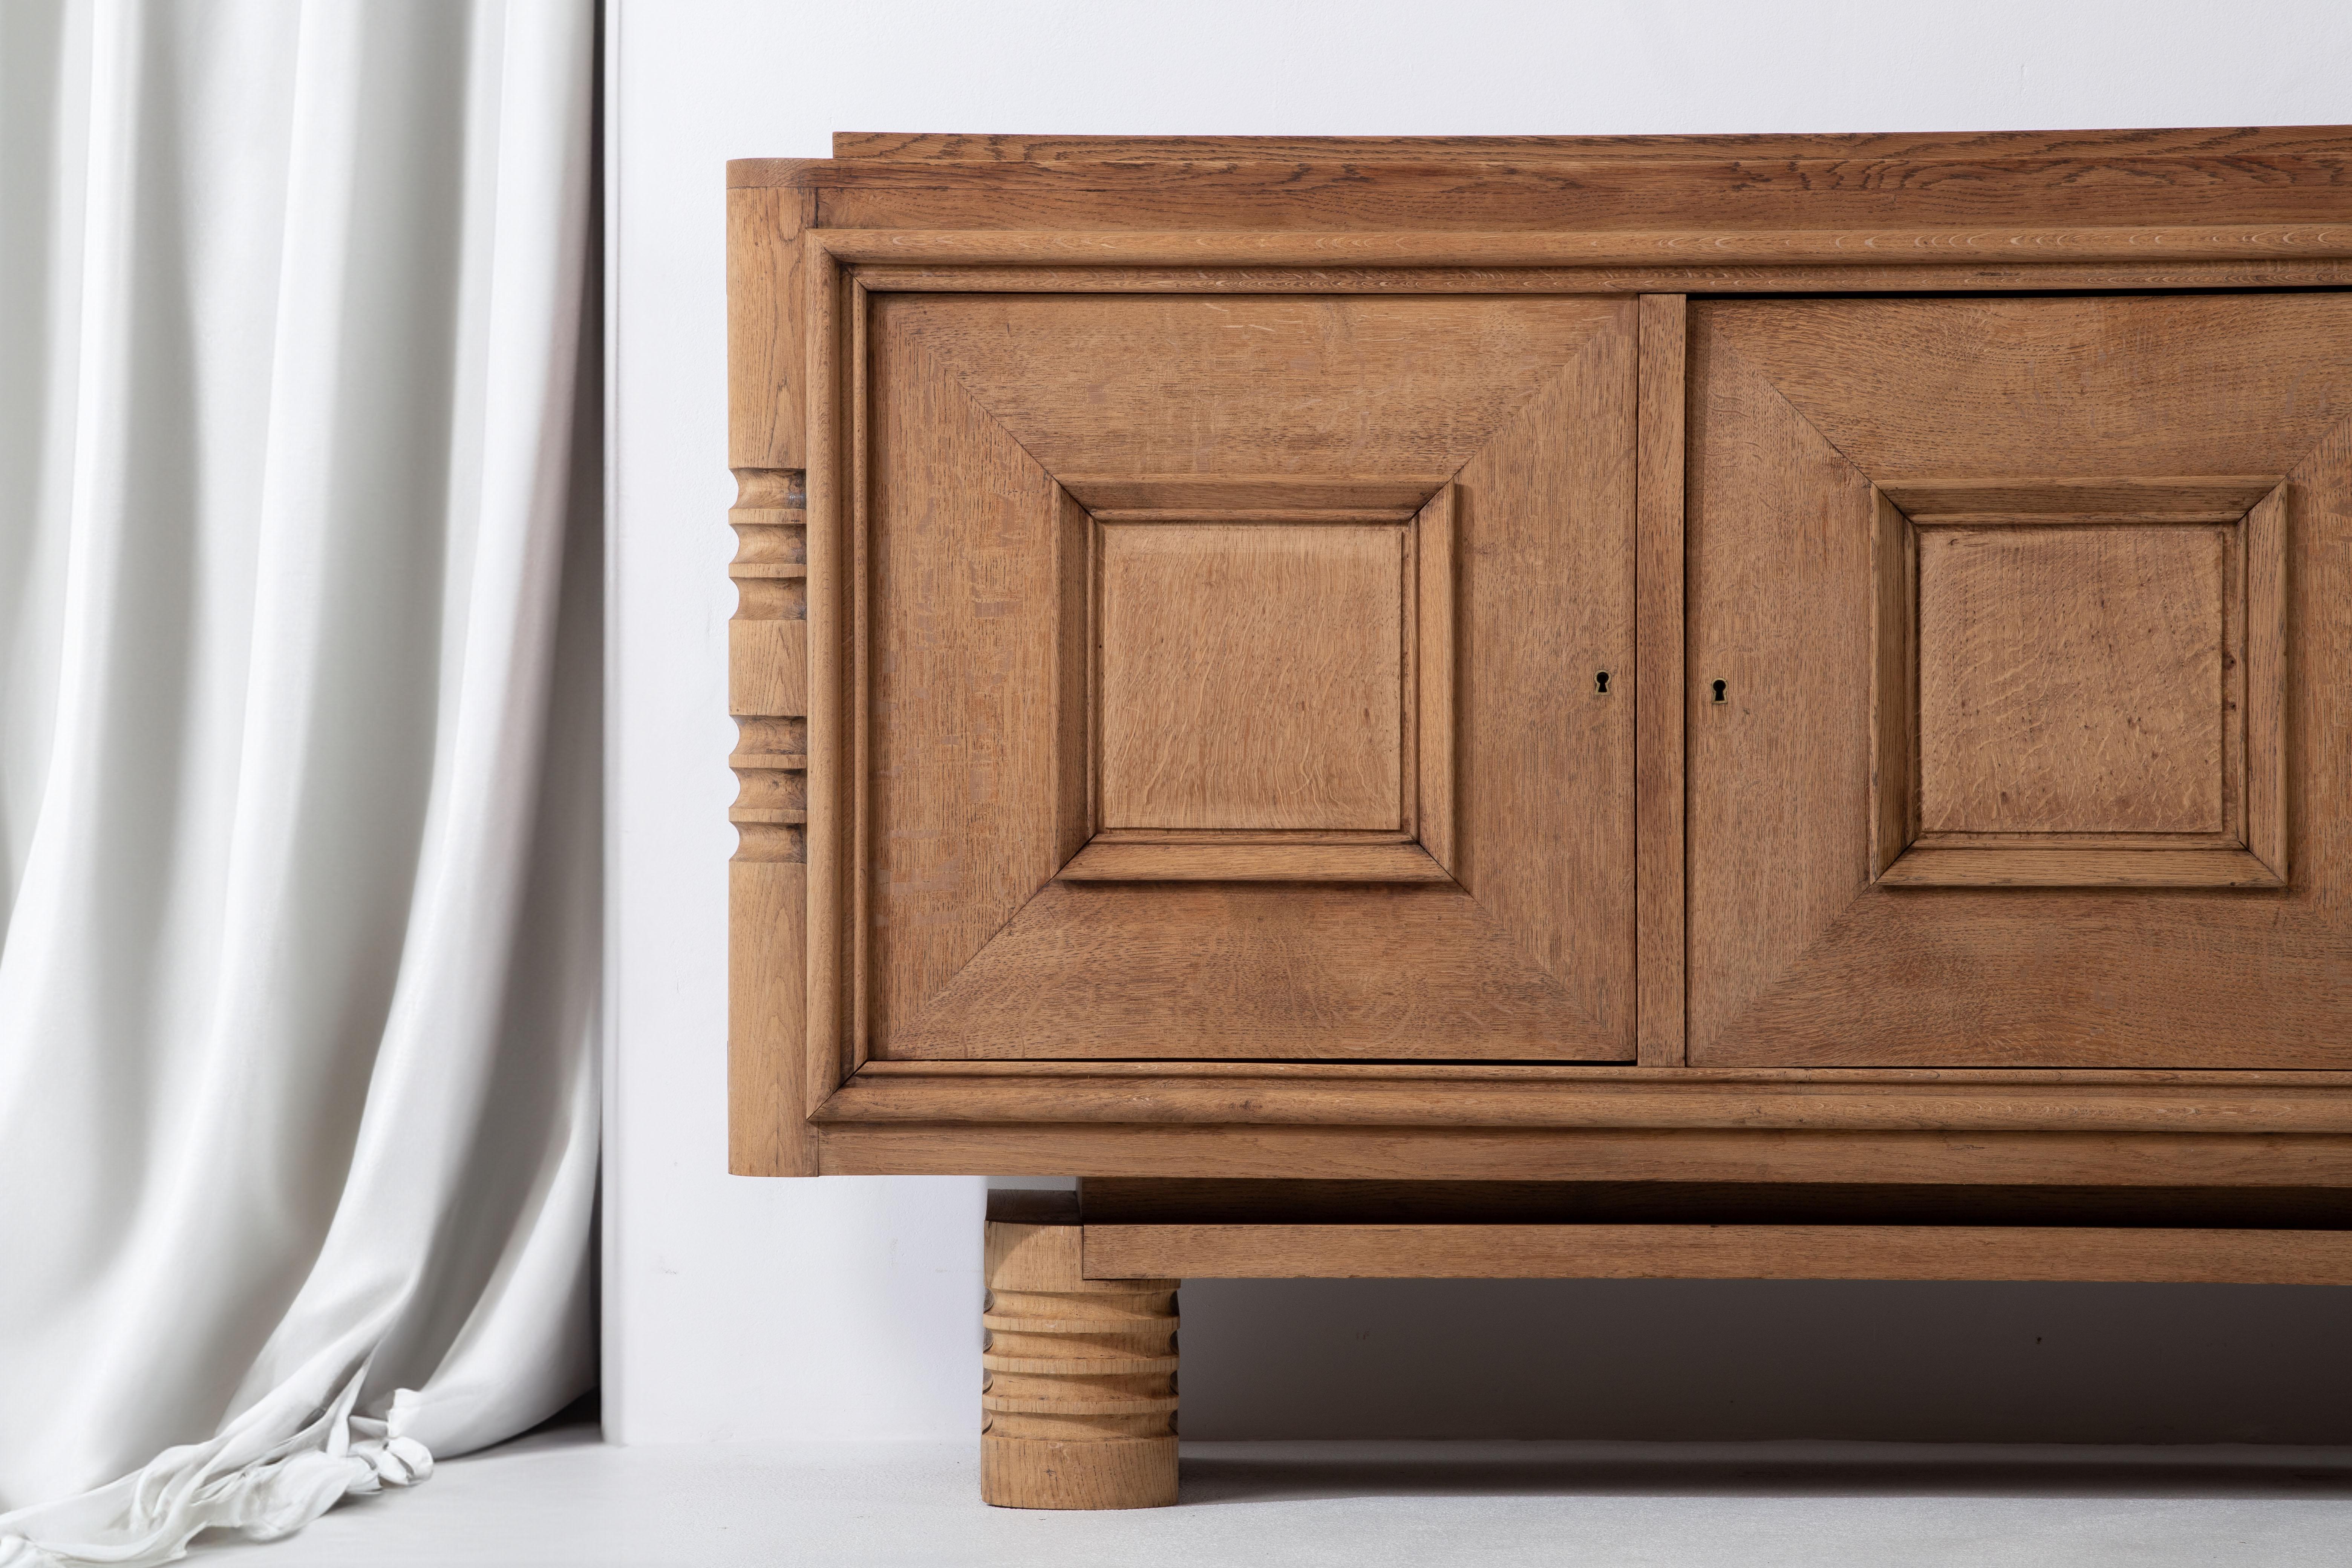 Introducing an exquisite Art Deco buffet in natural oak, crafted in the style of the renowned French furniture designer, Charles Dudouyt. Dudouyt's work is celebrated for its exceptional craftsmanship, innovative designs, and seamless blend of